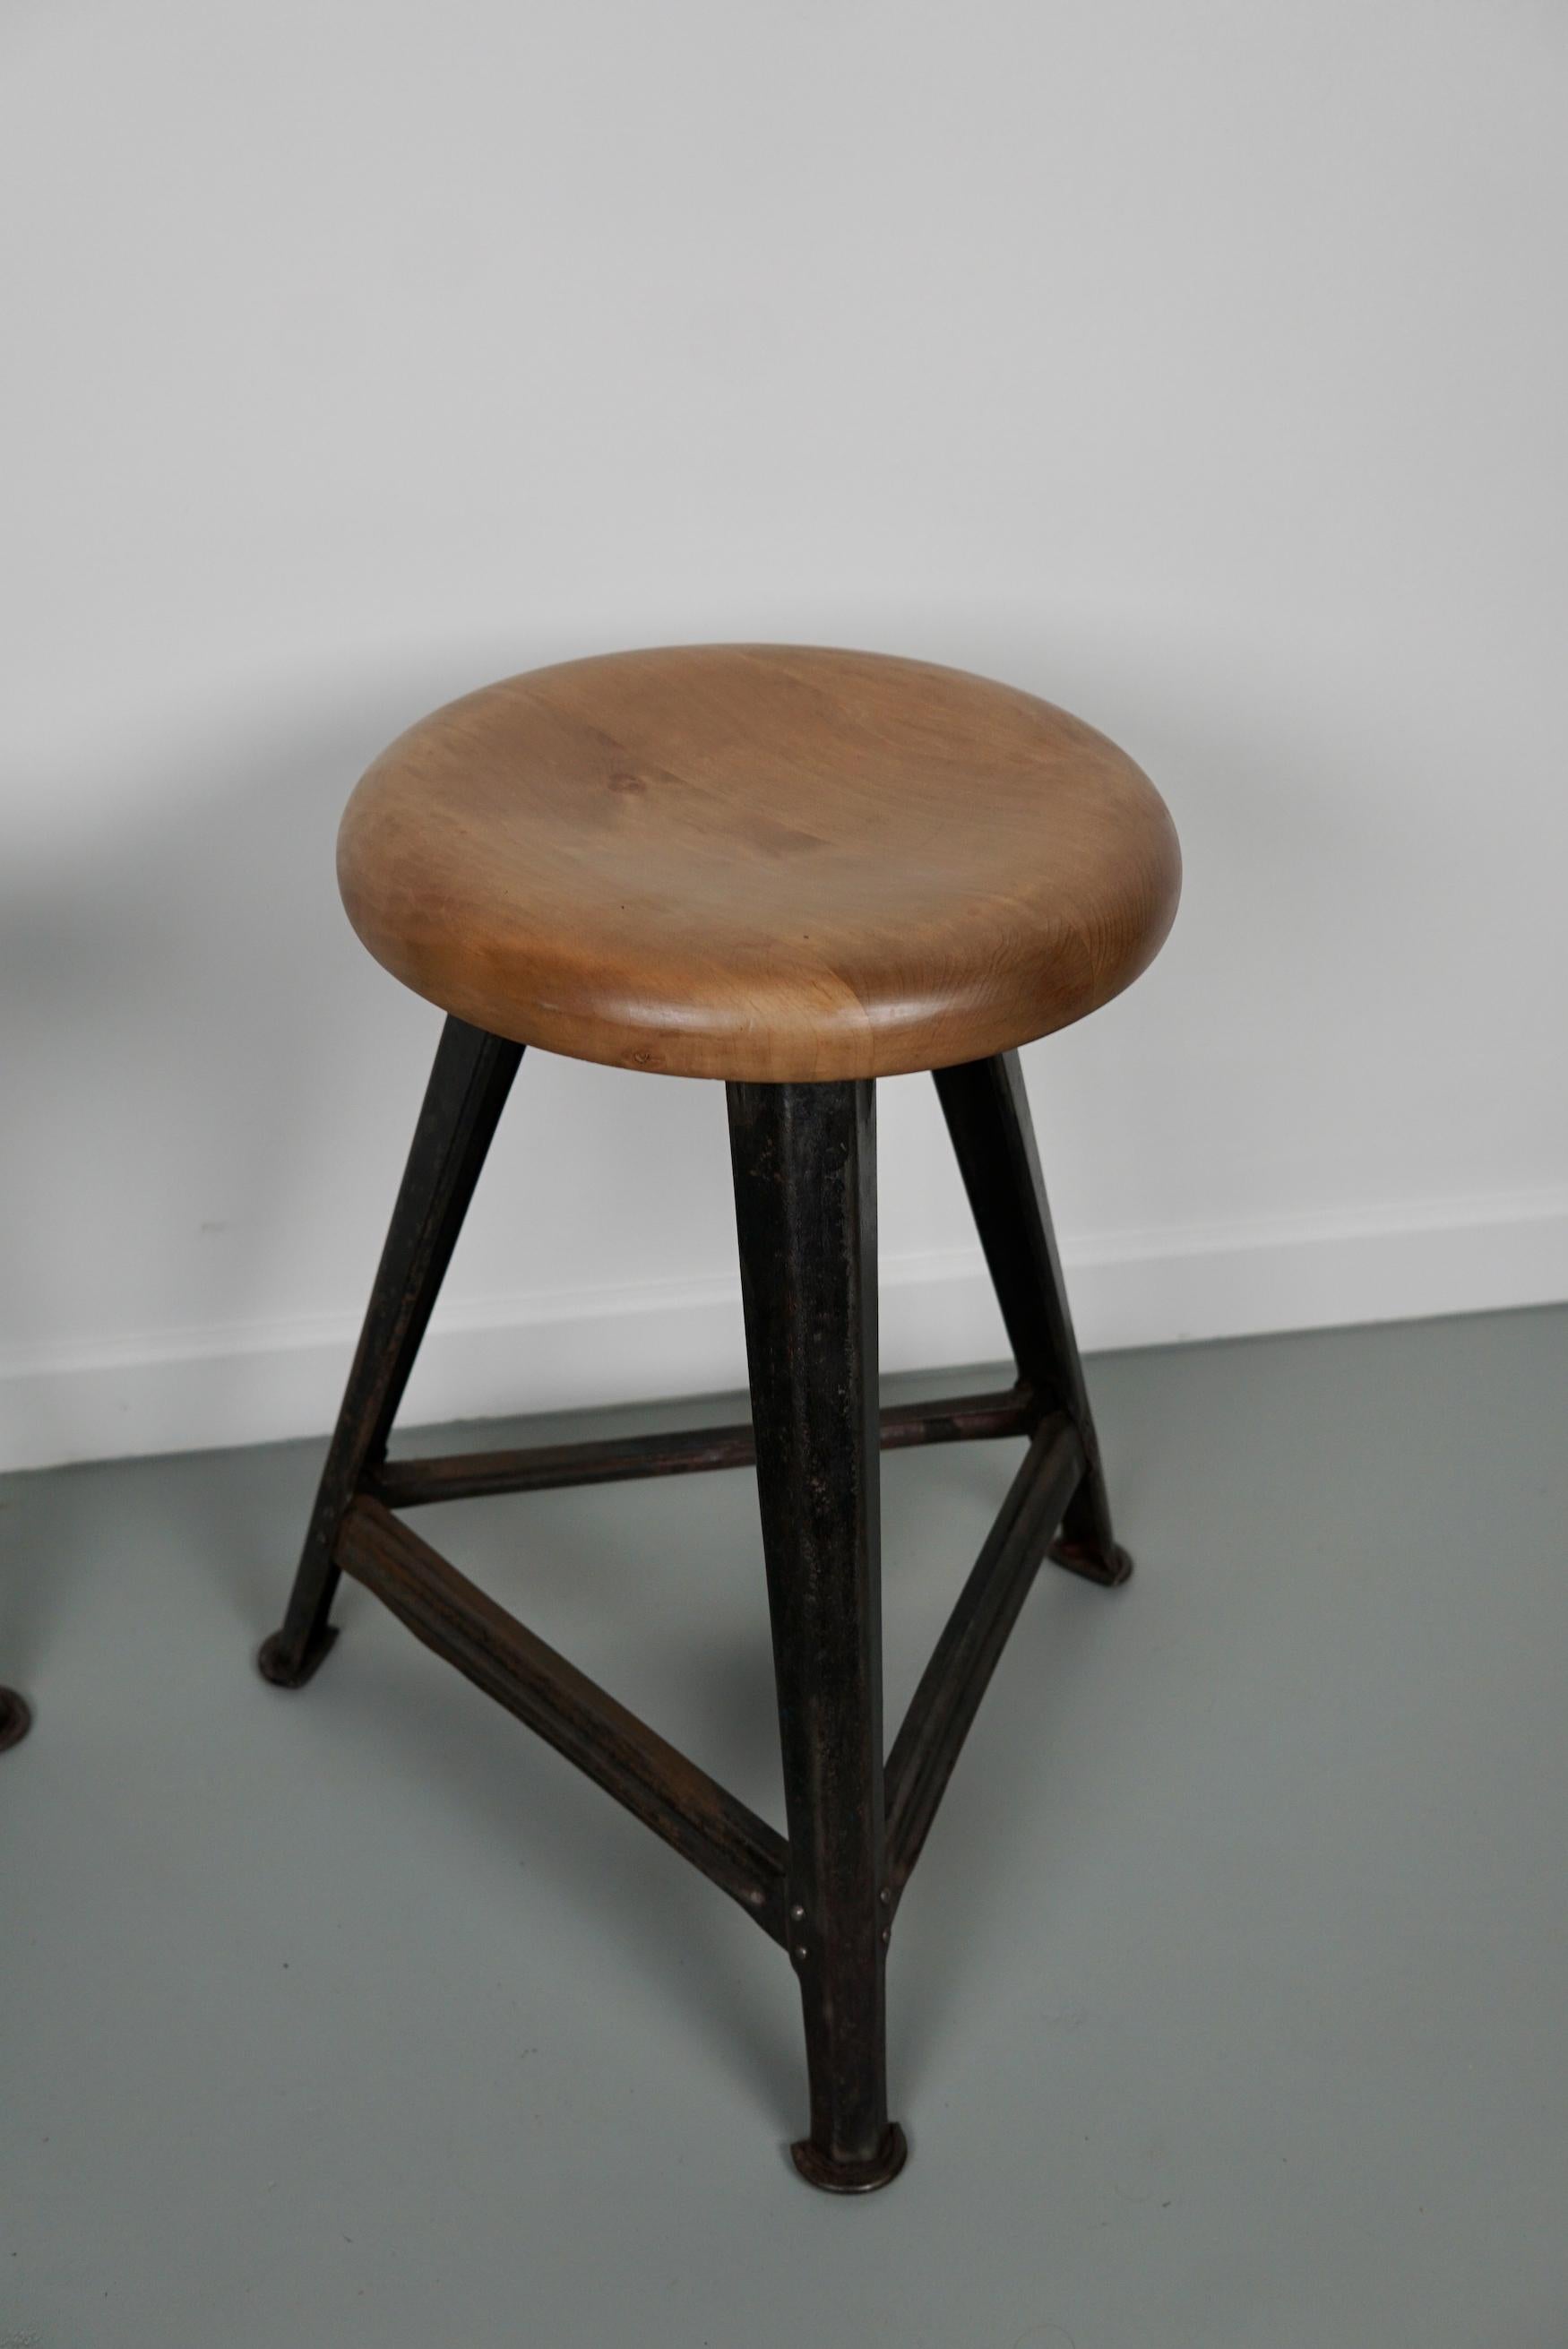 Pair of Industrial Steel Factory Stools by Rowac Robert Wagner Chemnitz, 1930s In Good Condition For Sale In Nijmegen, NL